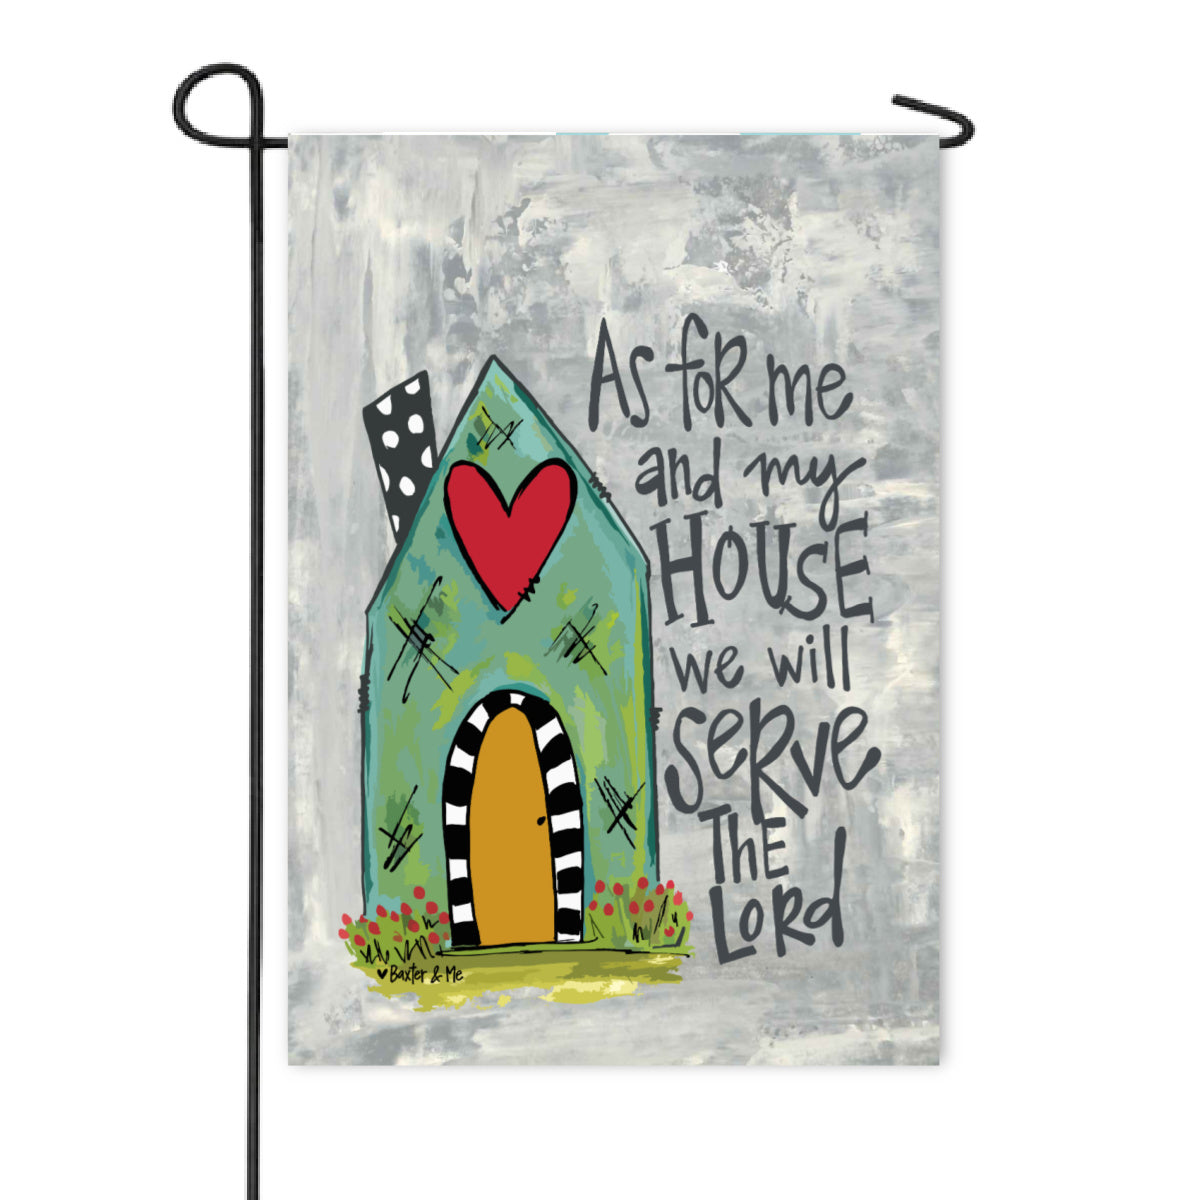 Serve the Lord Garden Flag